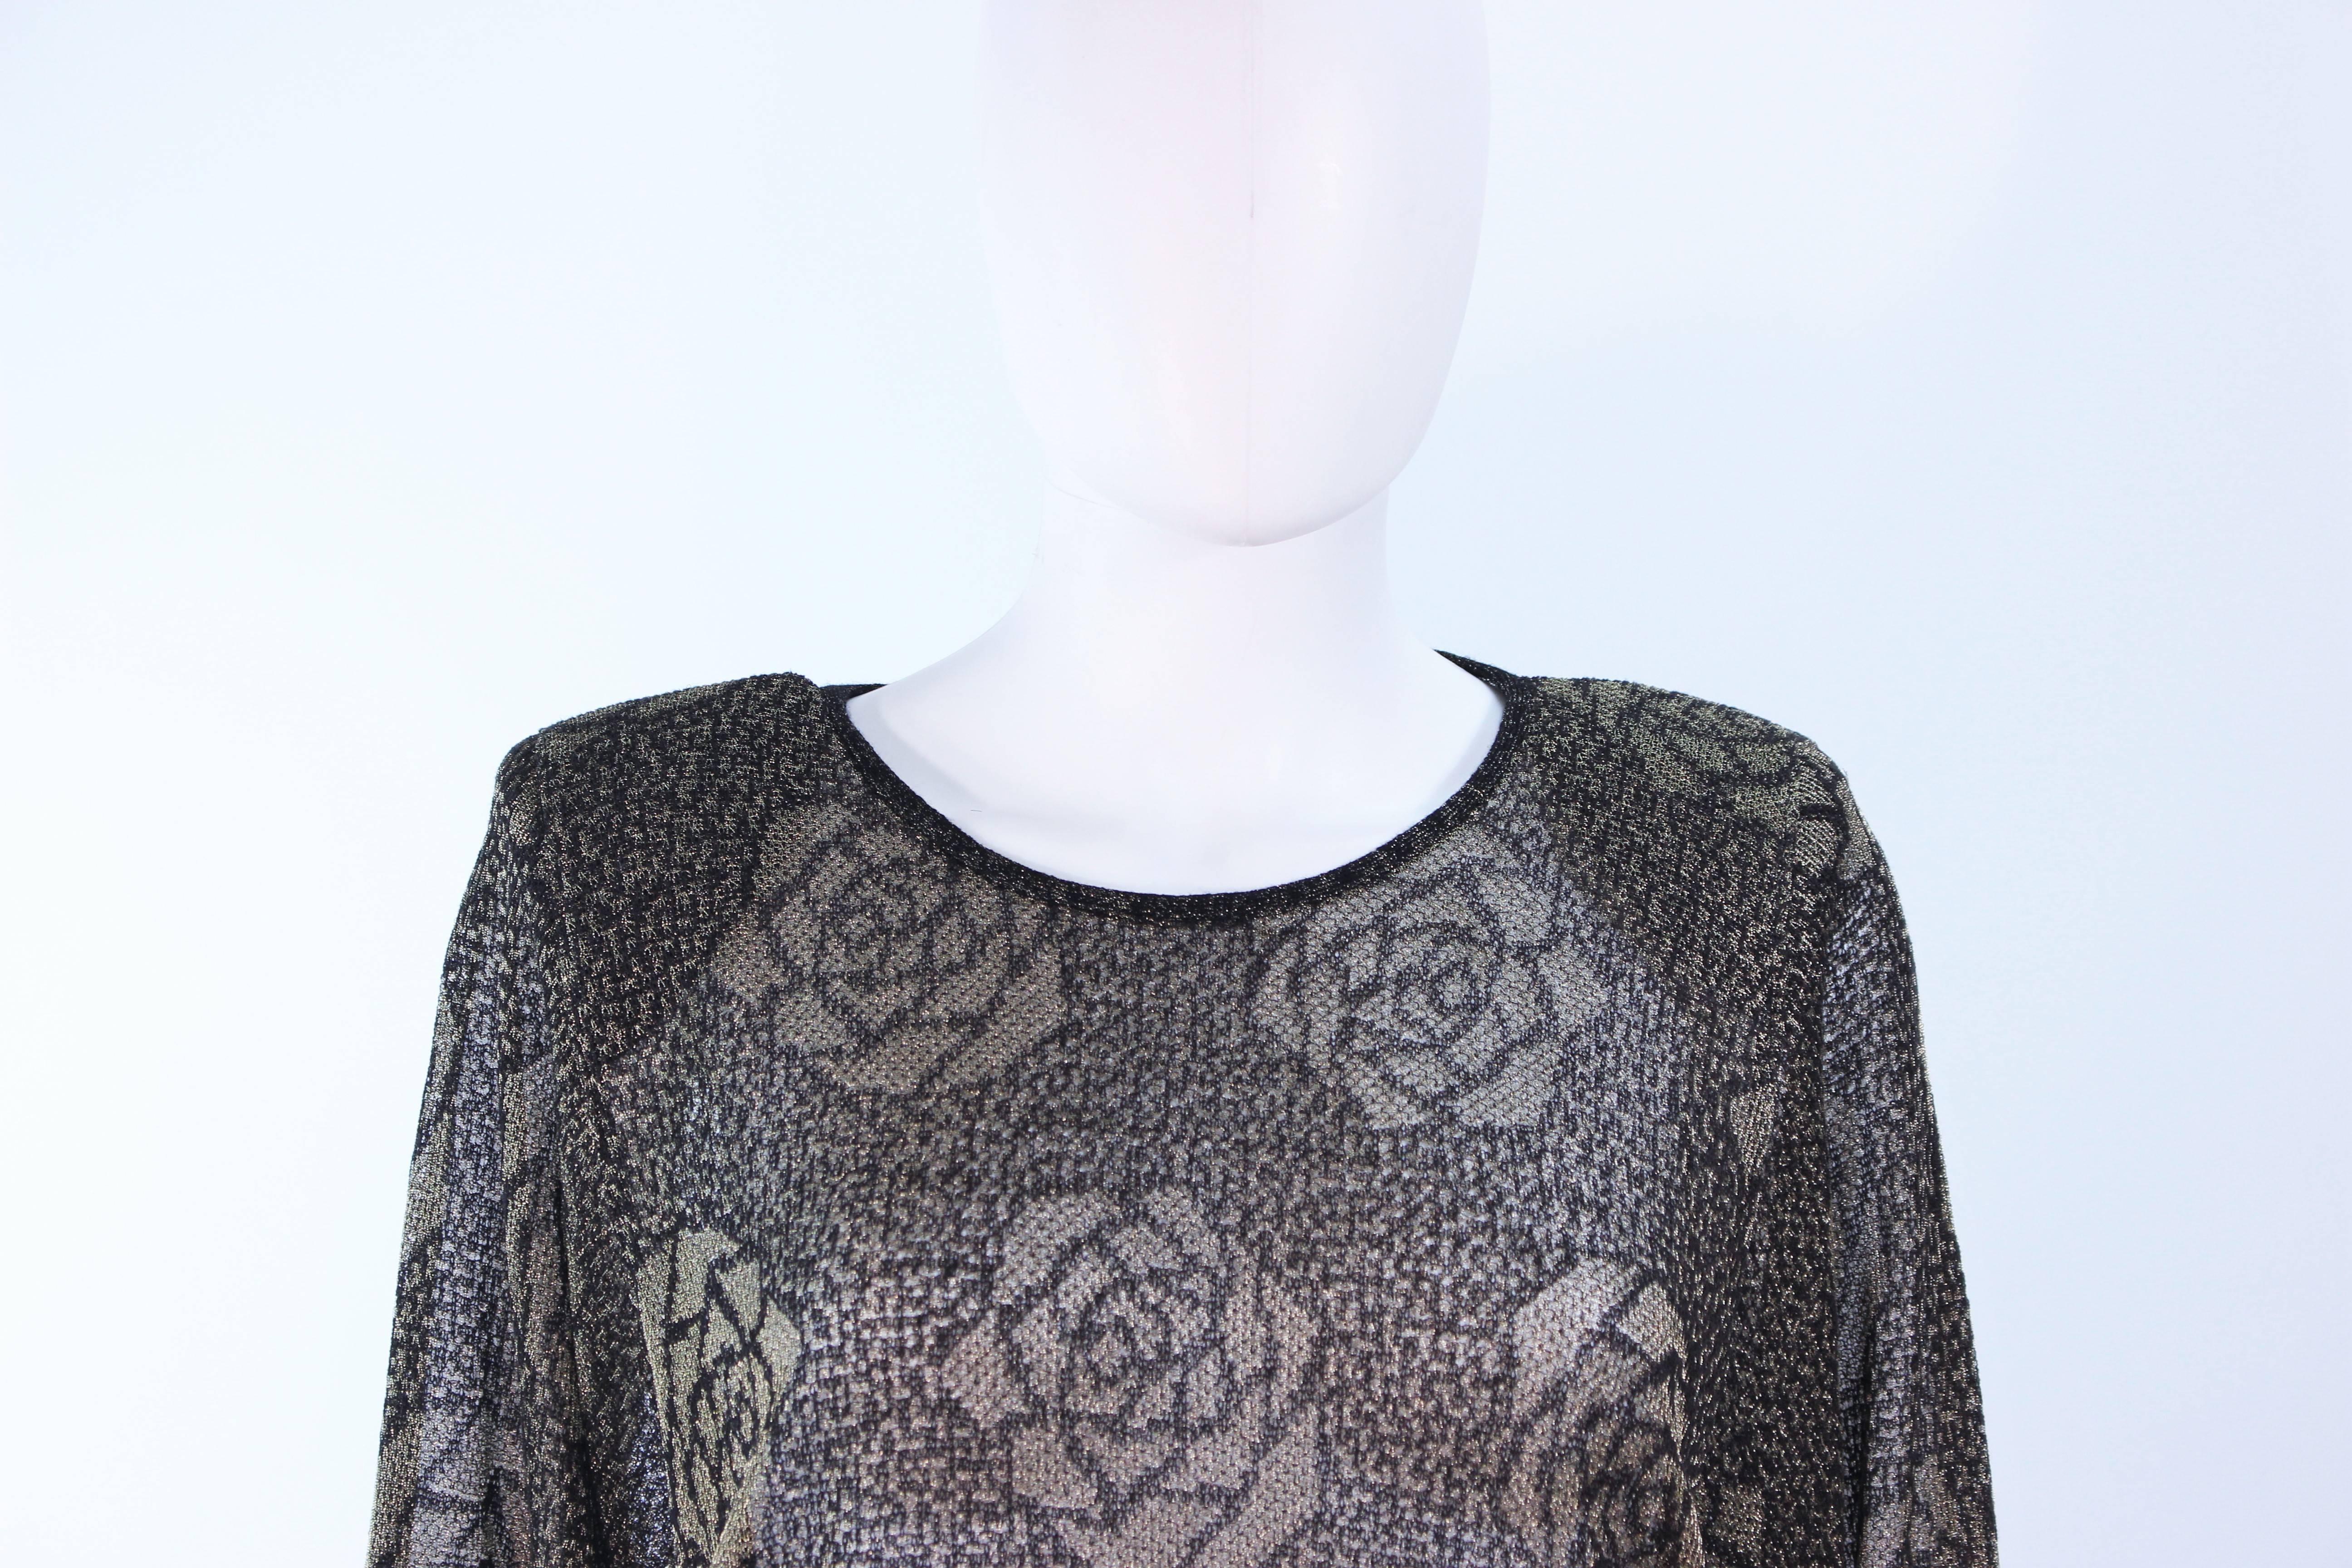 MISSONI Black and Gold Floral Metallic Knit Pant Set Size Size Medium Large 46 In Excellent Condition For Sale In Los Angeles, CA